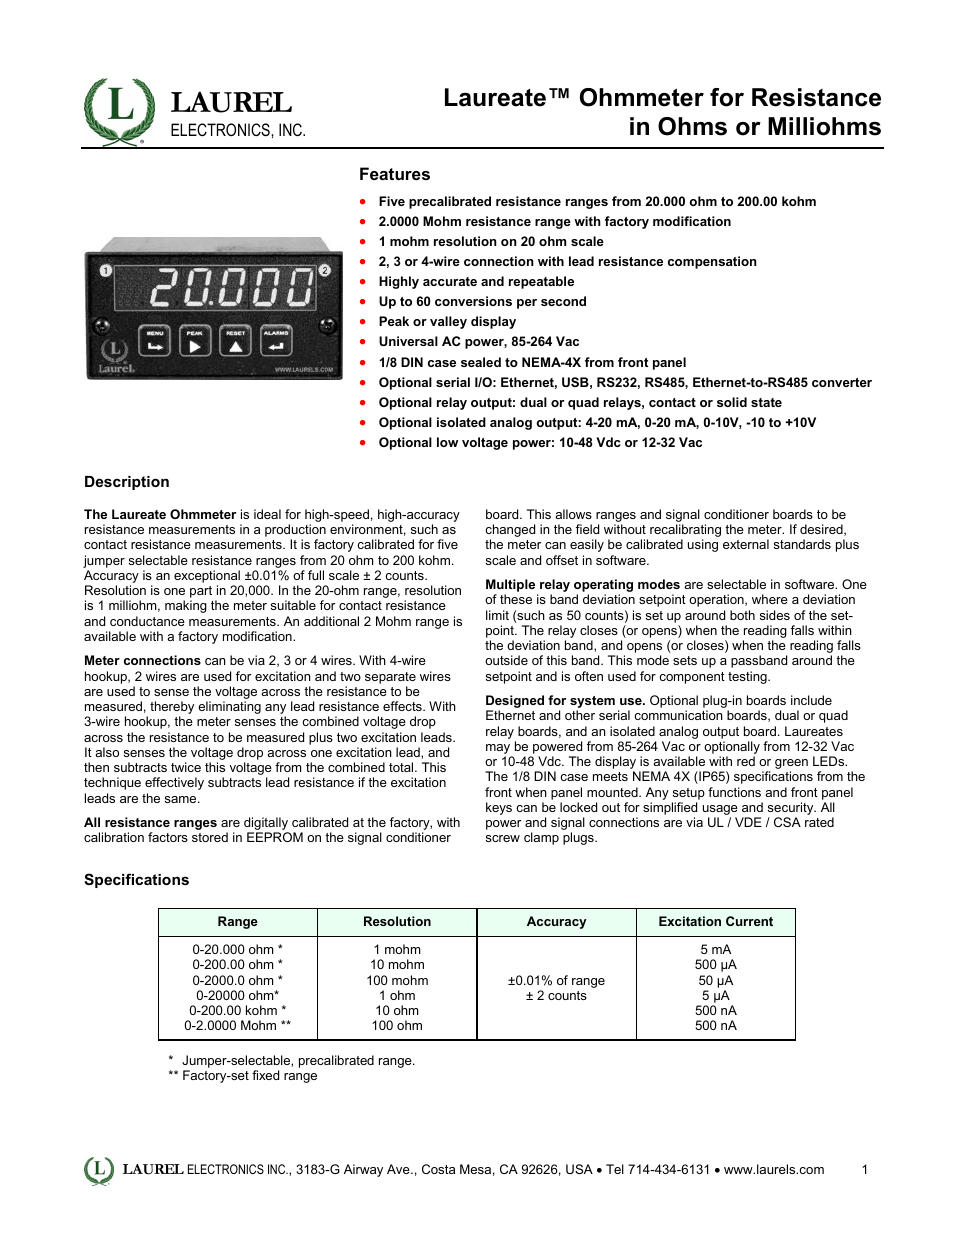 Laureate Ohmmeter for Resistance in Ohms or Milliohms